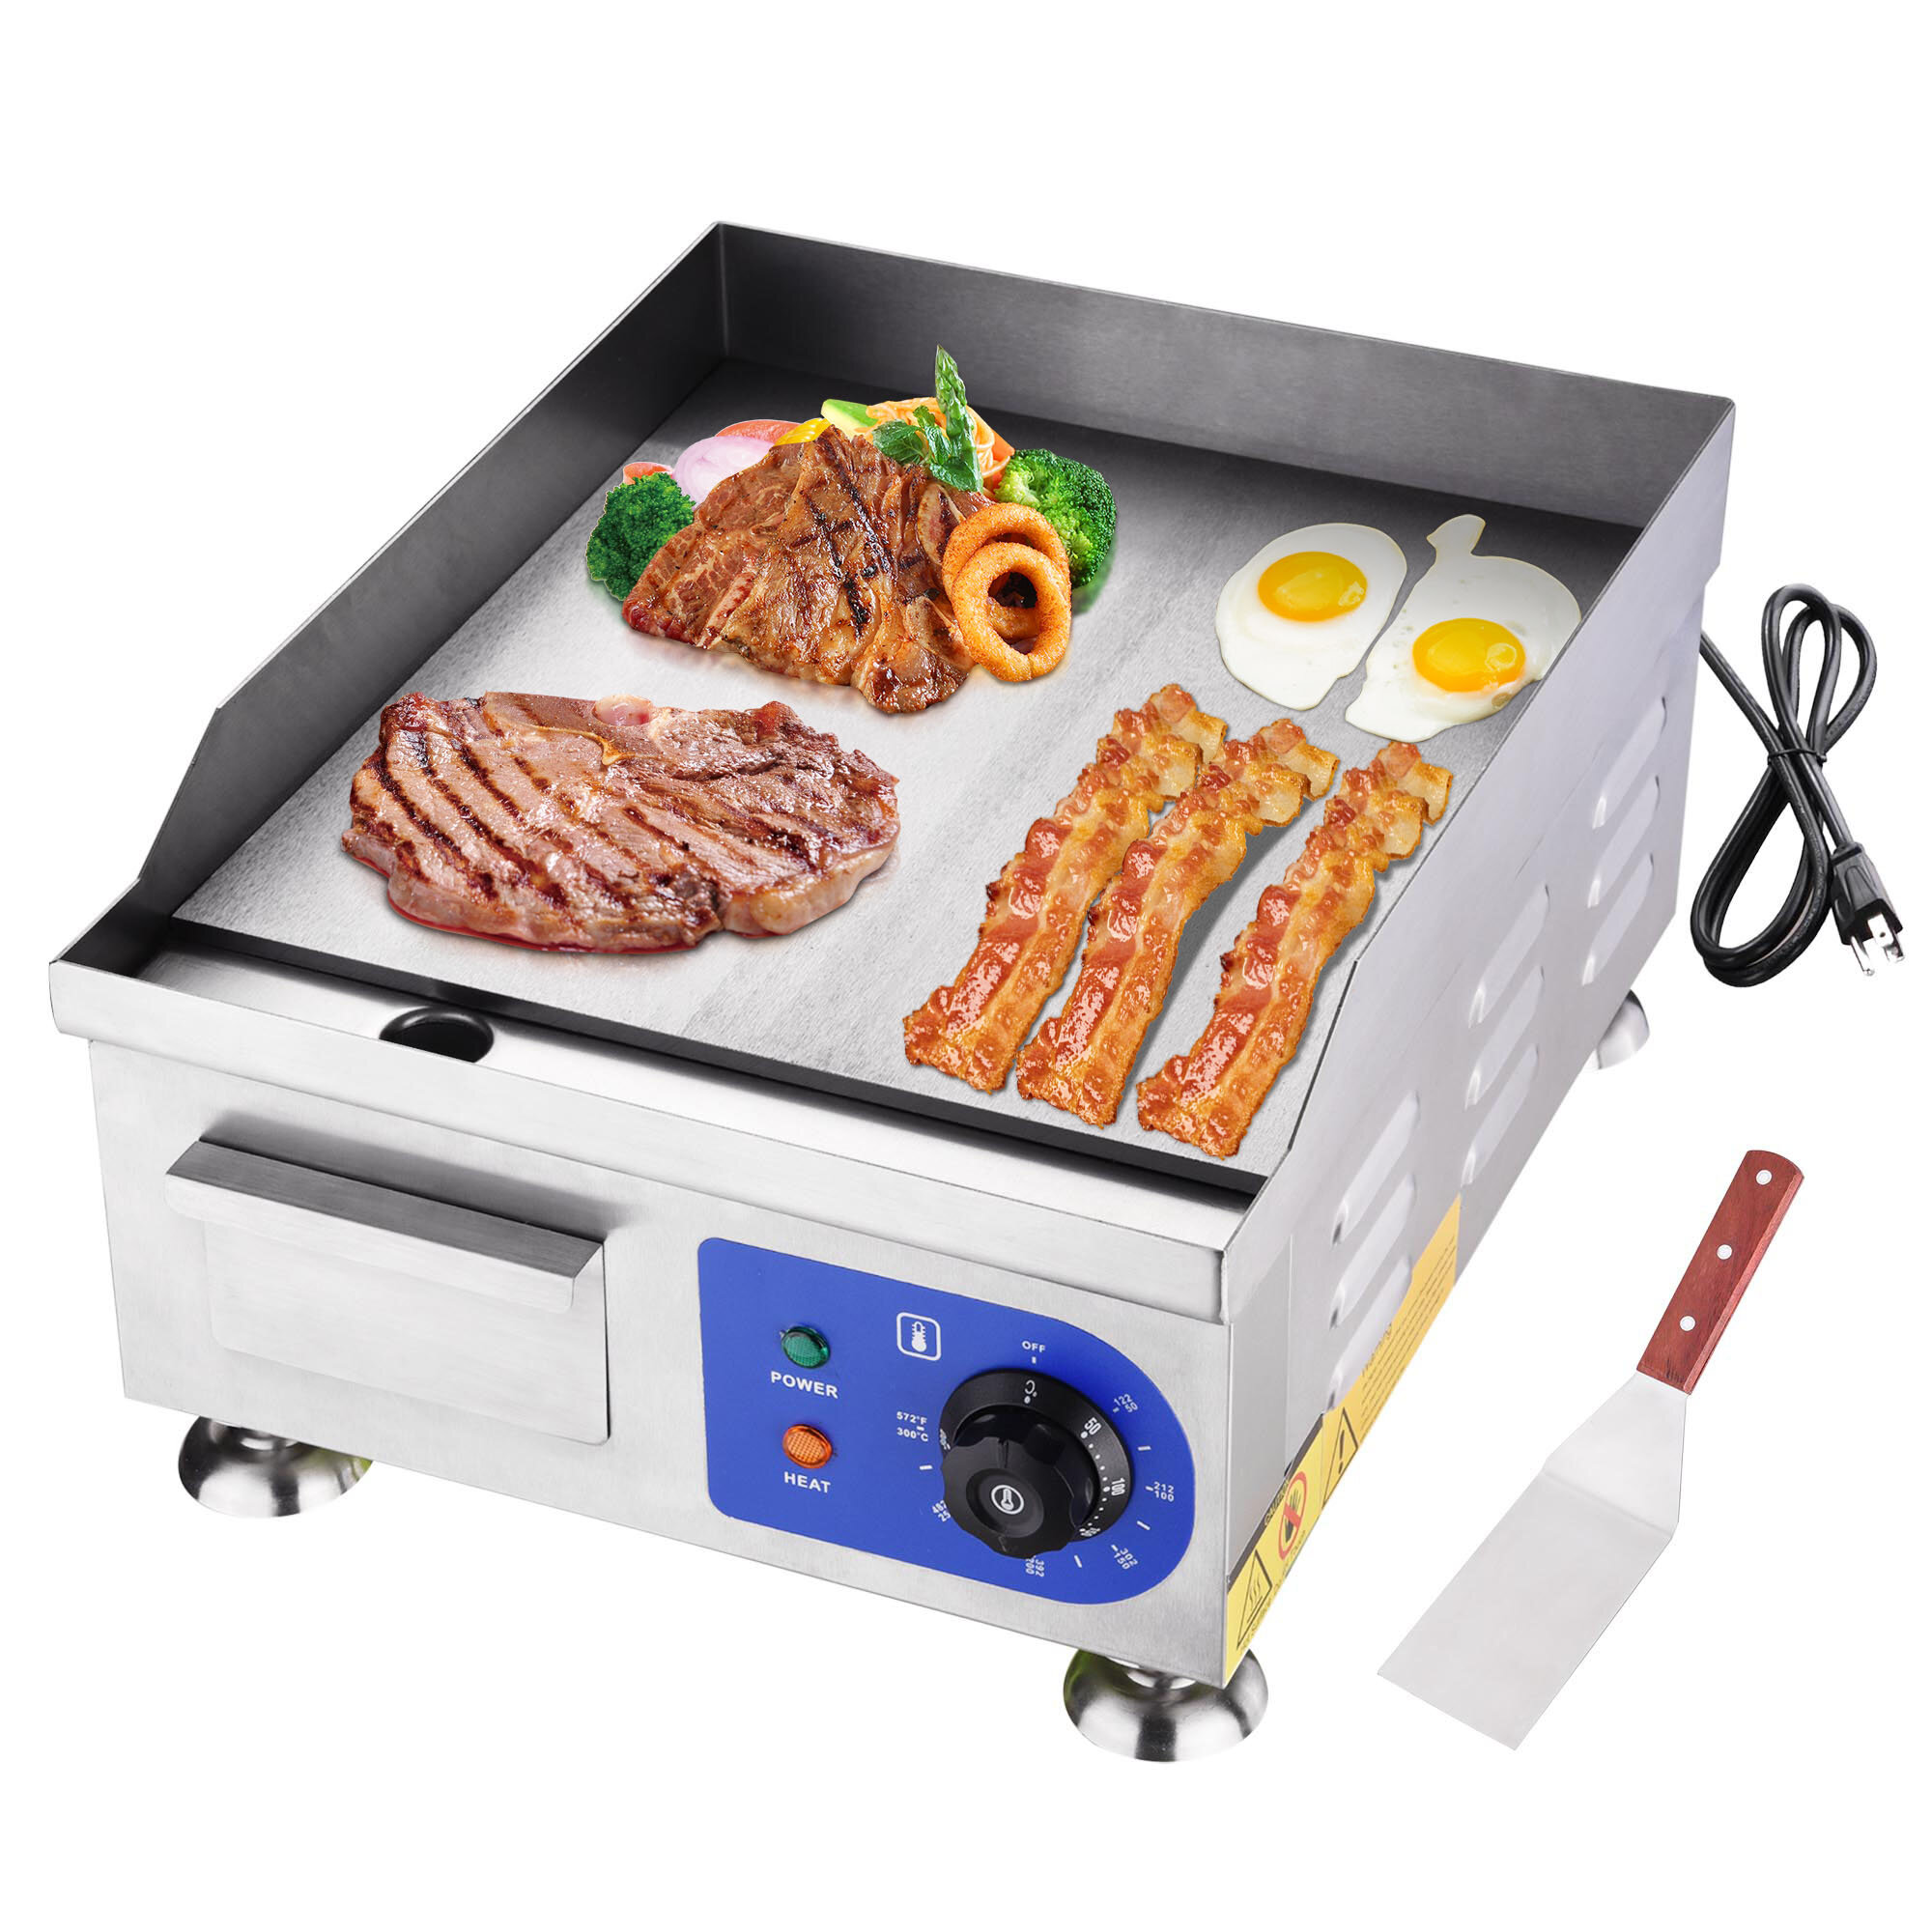 WeChef 1500W 14 Electric Countertop Griddle Flat Top Commercial